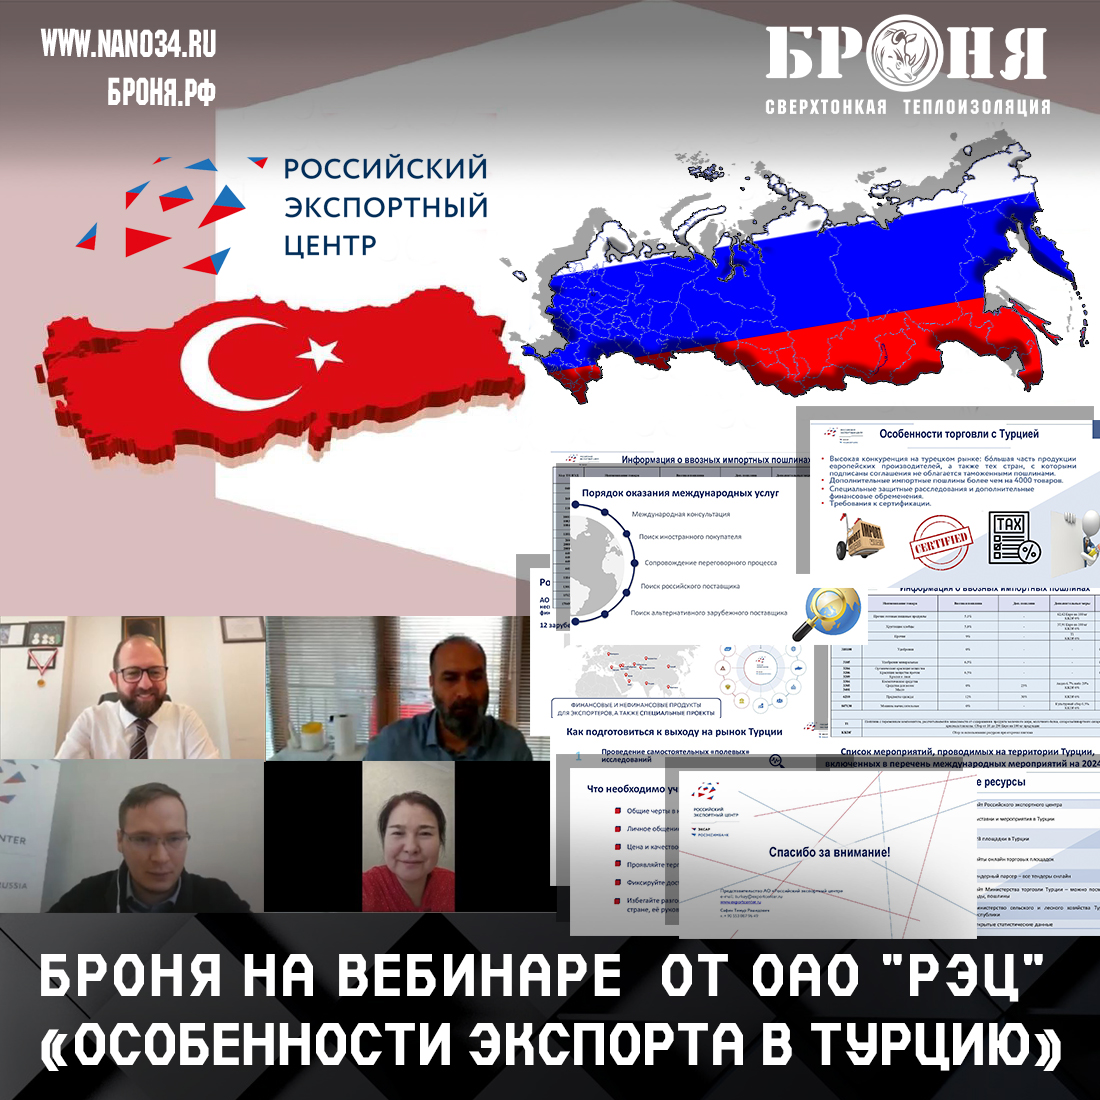 NPO Bronya LLC took part in the webinar "Peculiarities of export to Turkey" organized by the Russian Export Center,